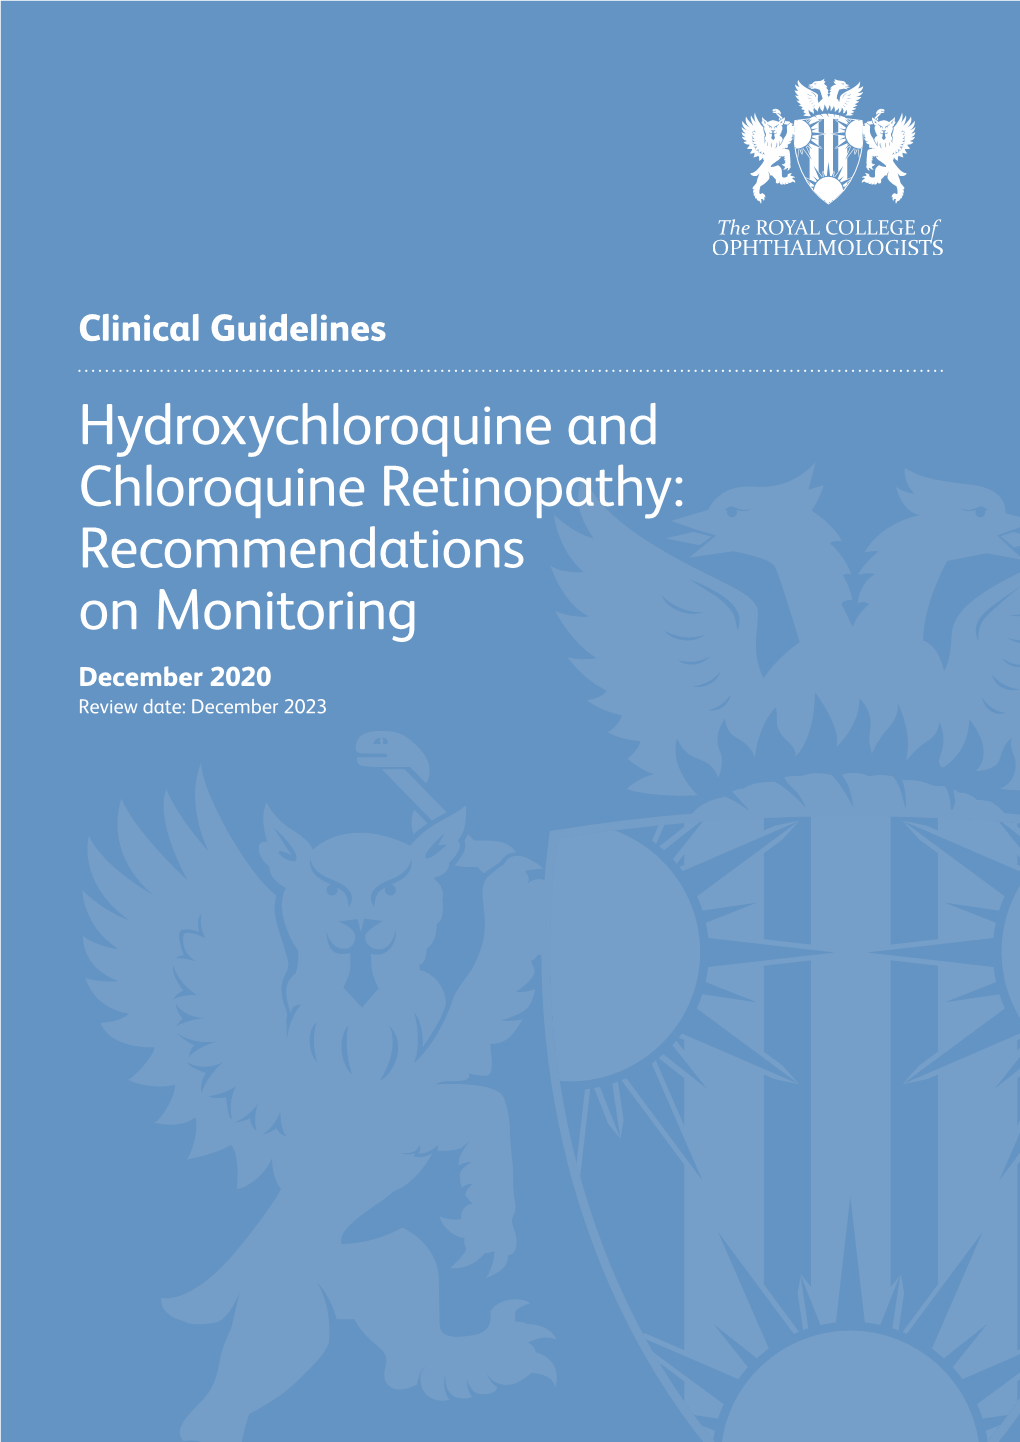 Hydroxychloroquine and Chloroquine Retinopathy: Recommendations on Monitoring